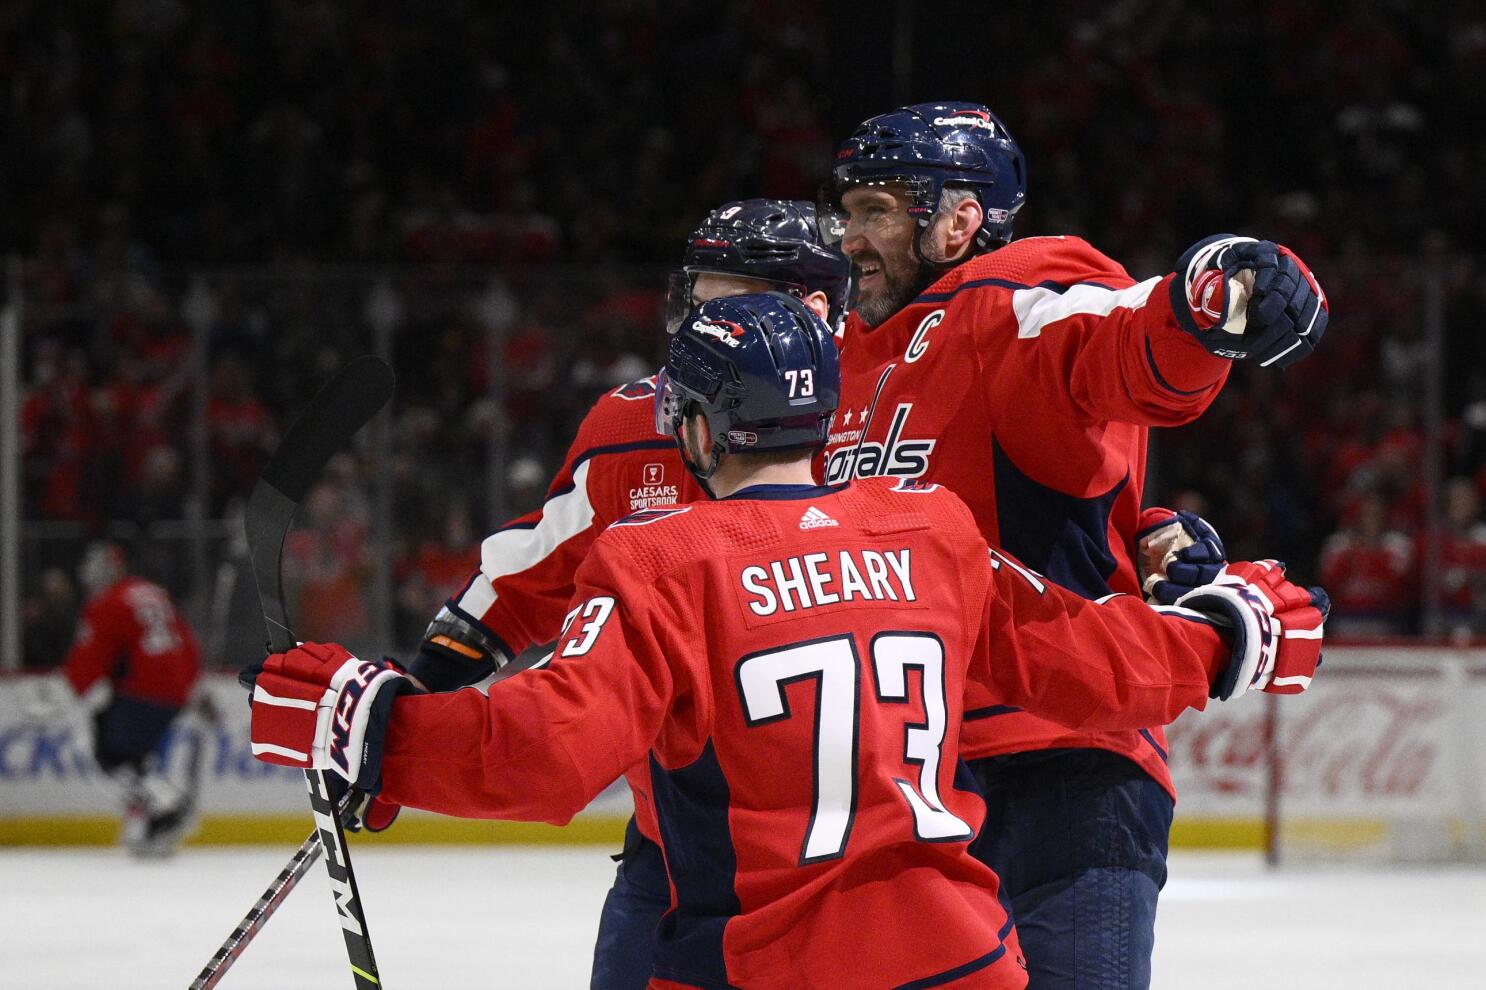 Capitals beat Penguins in OT to advance to conference finals